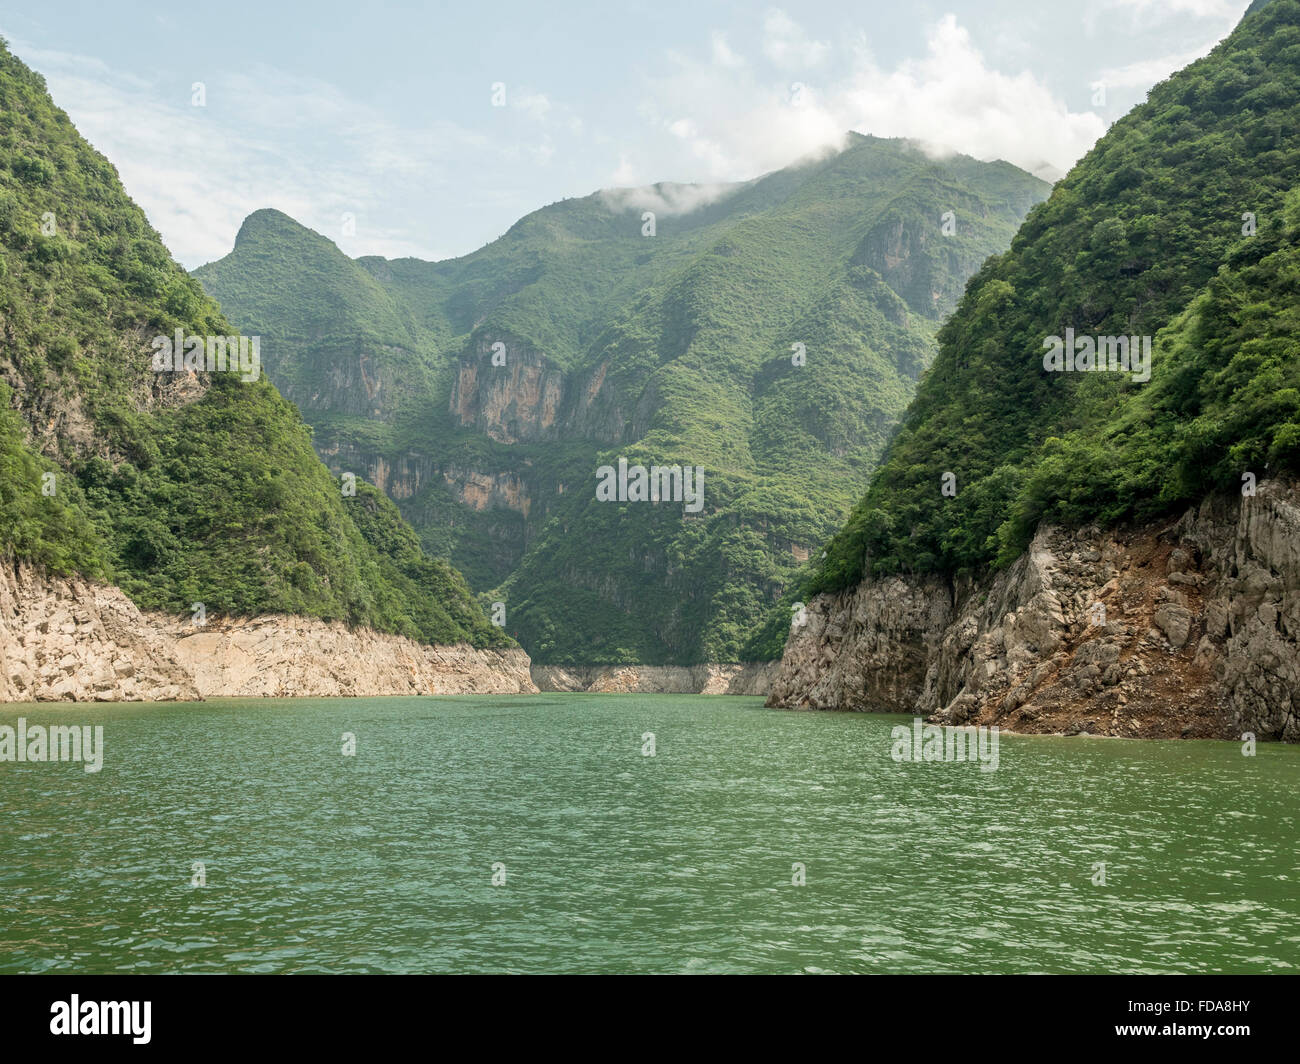 The Shennong Stream A Tributary Of The Yangtze River With Steep Limestone Cliffs After Being Flooded By The Three Gorges Dam Stock Photo